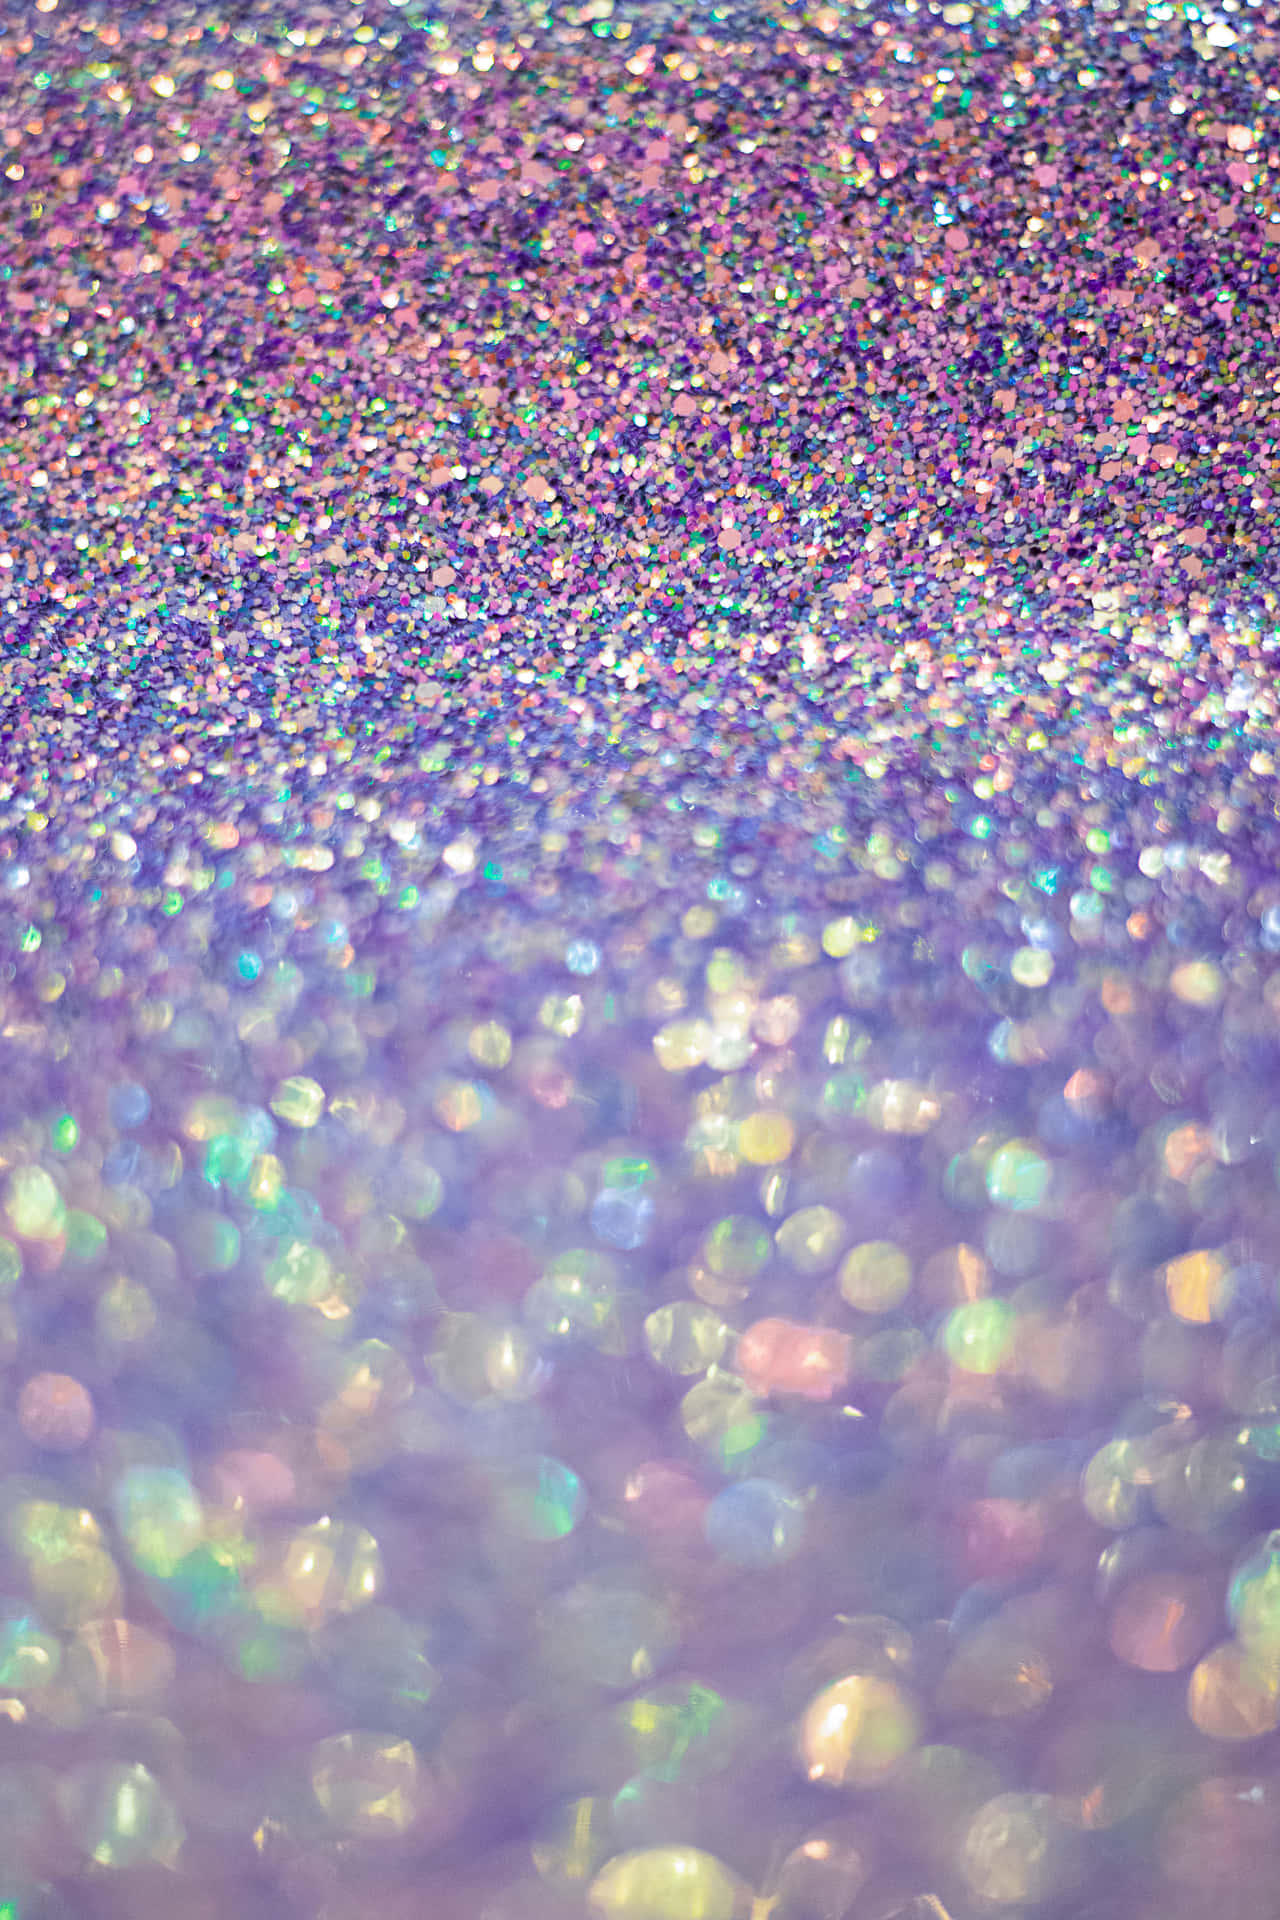 Shine bright like the sun with the help of this stunning Glittery background